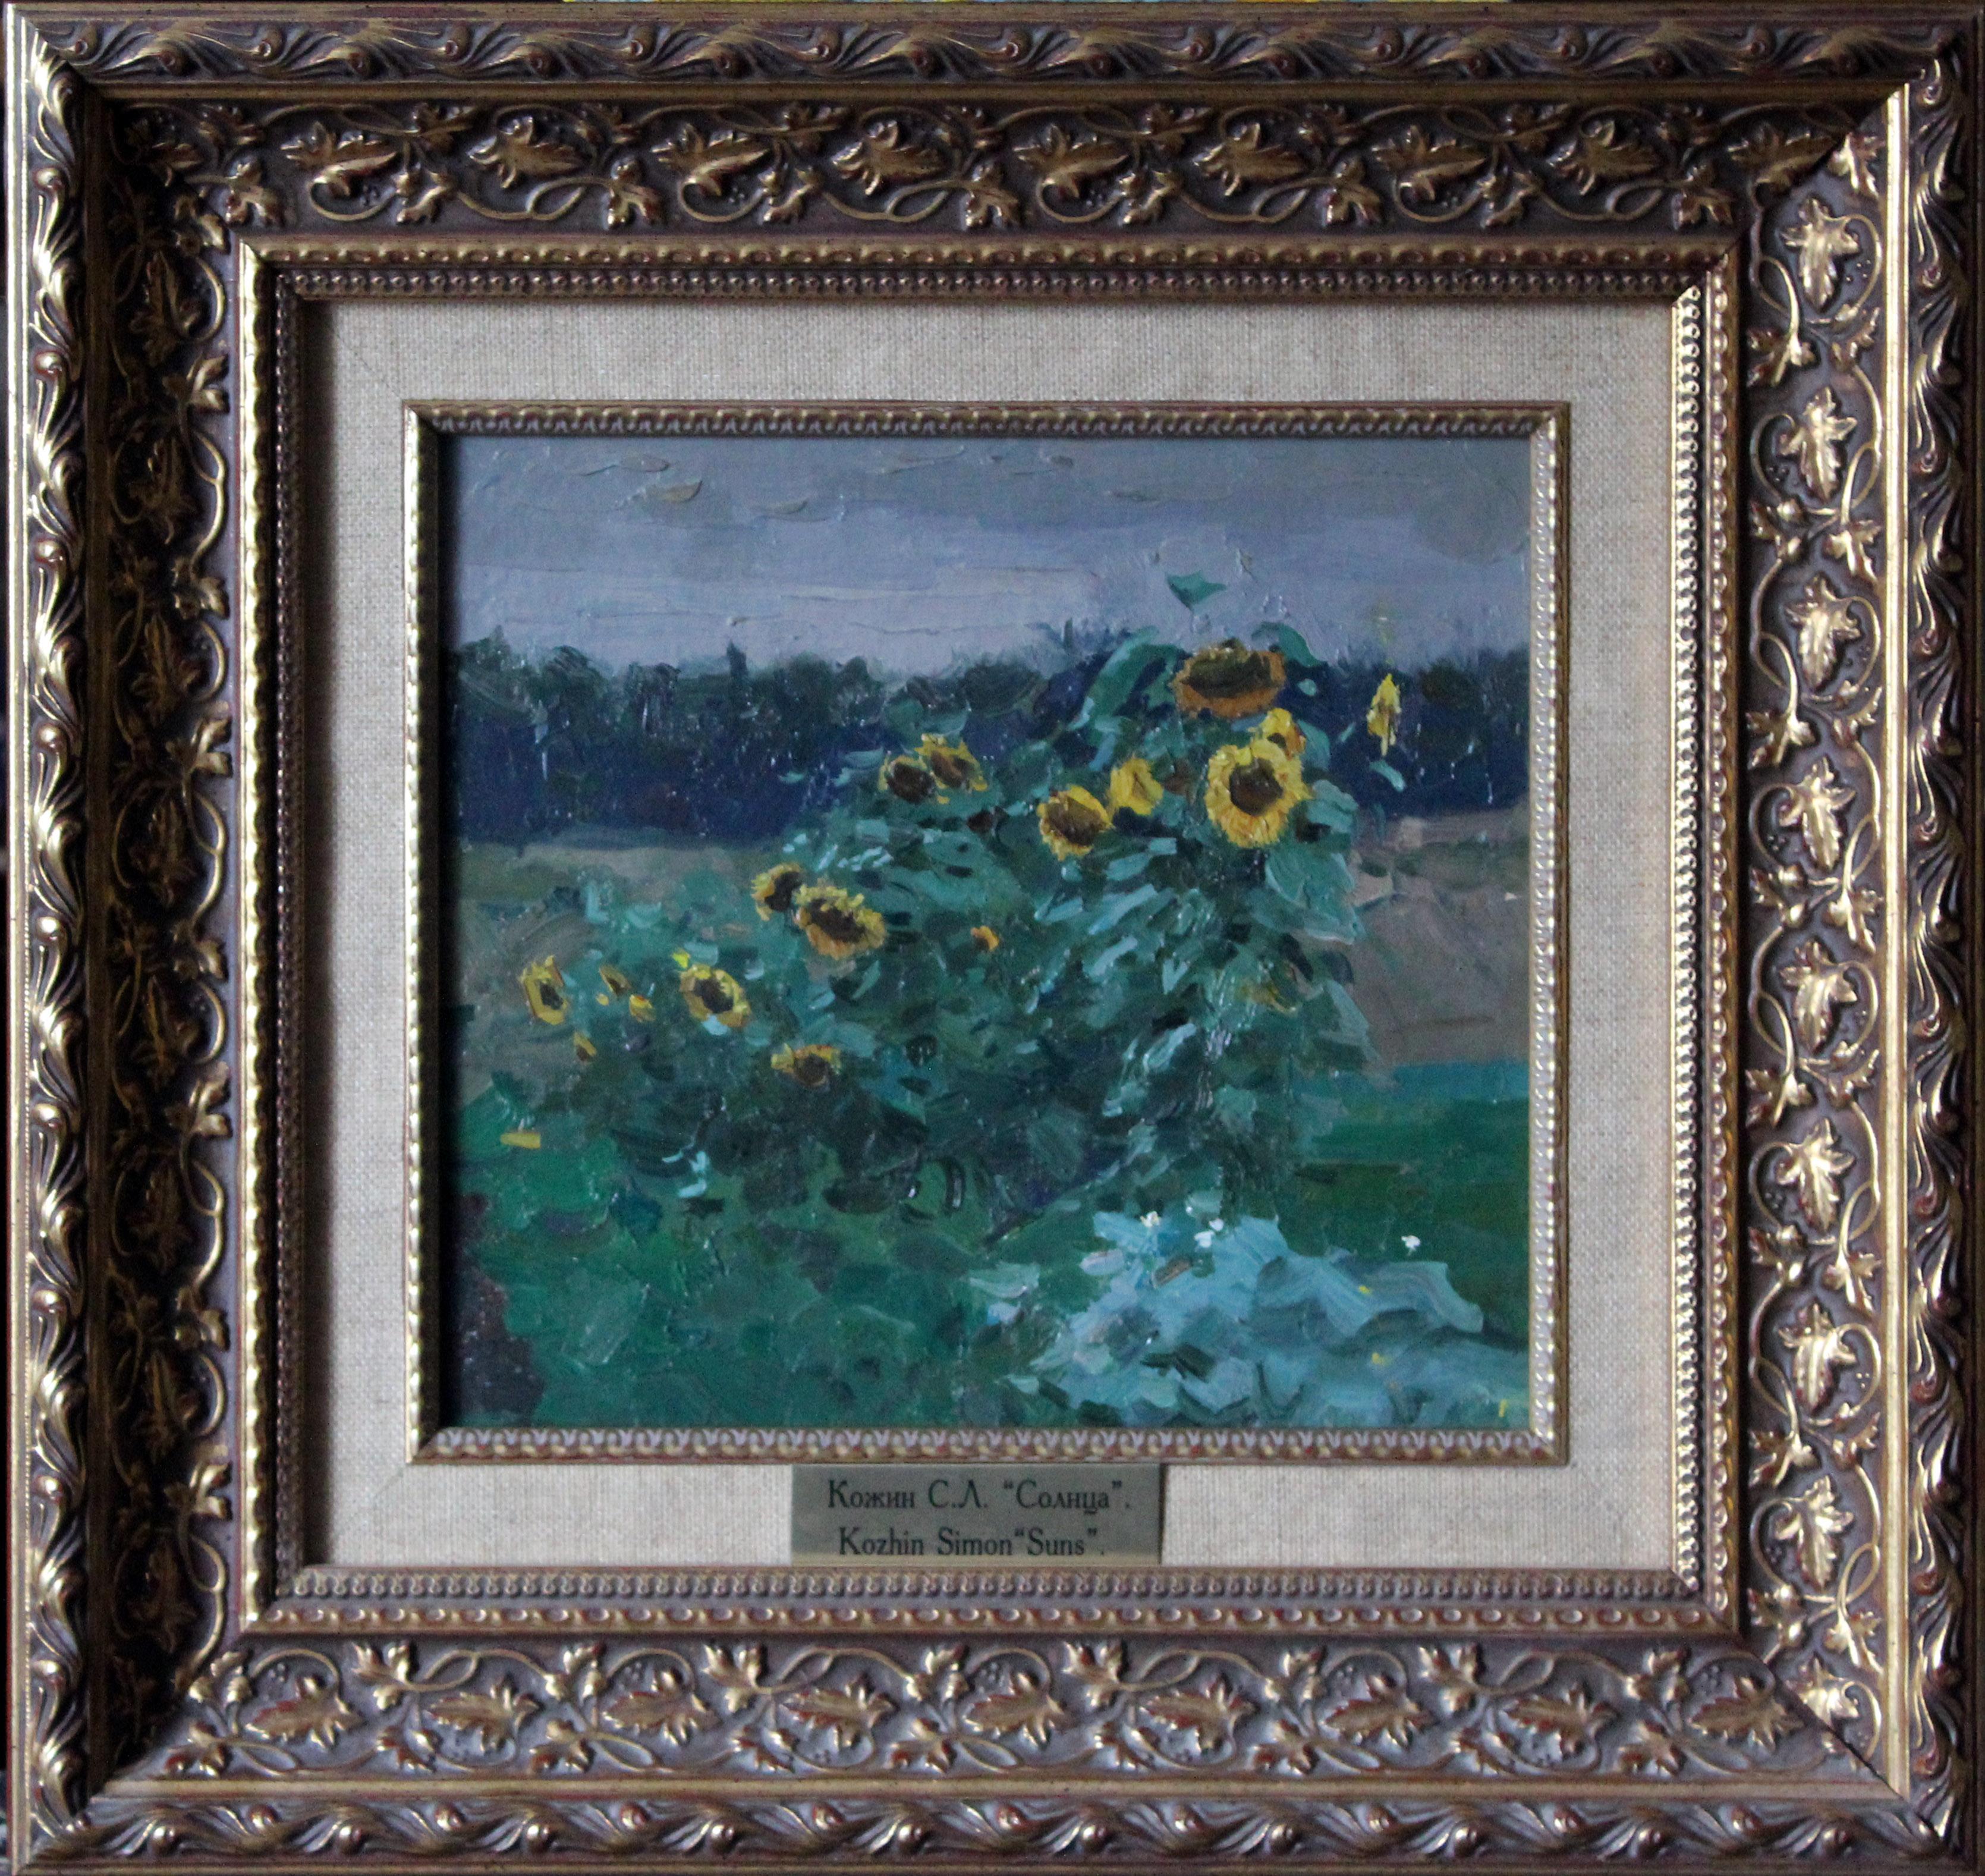 These flowers are some of my favorites in my artistic practice. I always see sunflowers and notice them right away. The sketch was painted near the house of my friend the artist Oleg Supereko in his village near Zvenigorod. In symbolism, a flower is